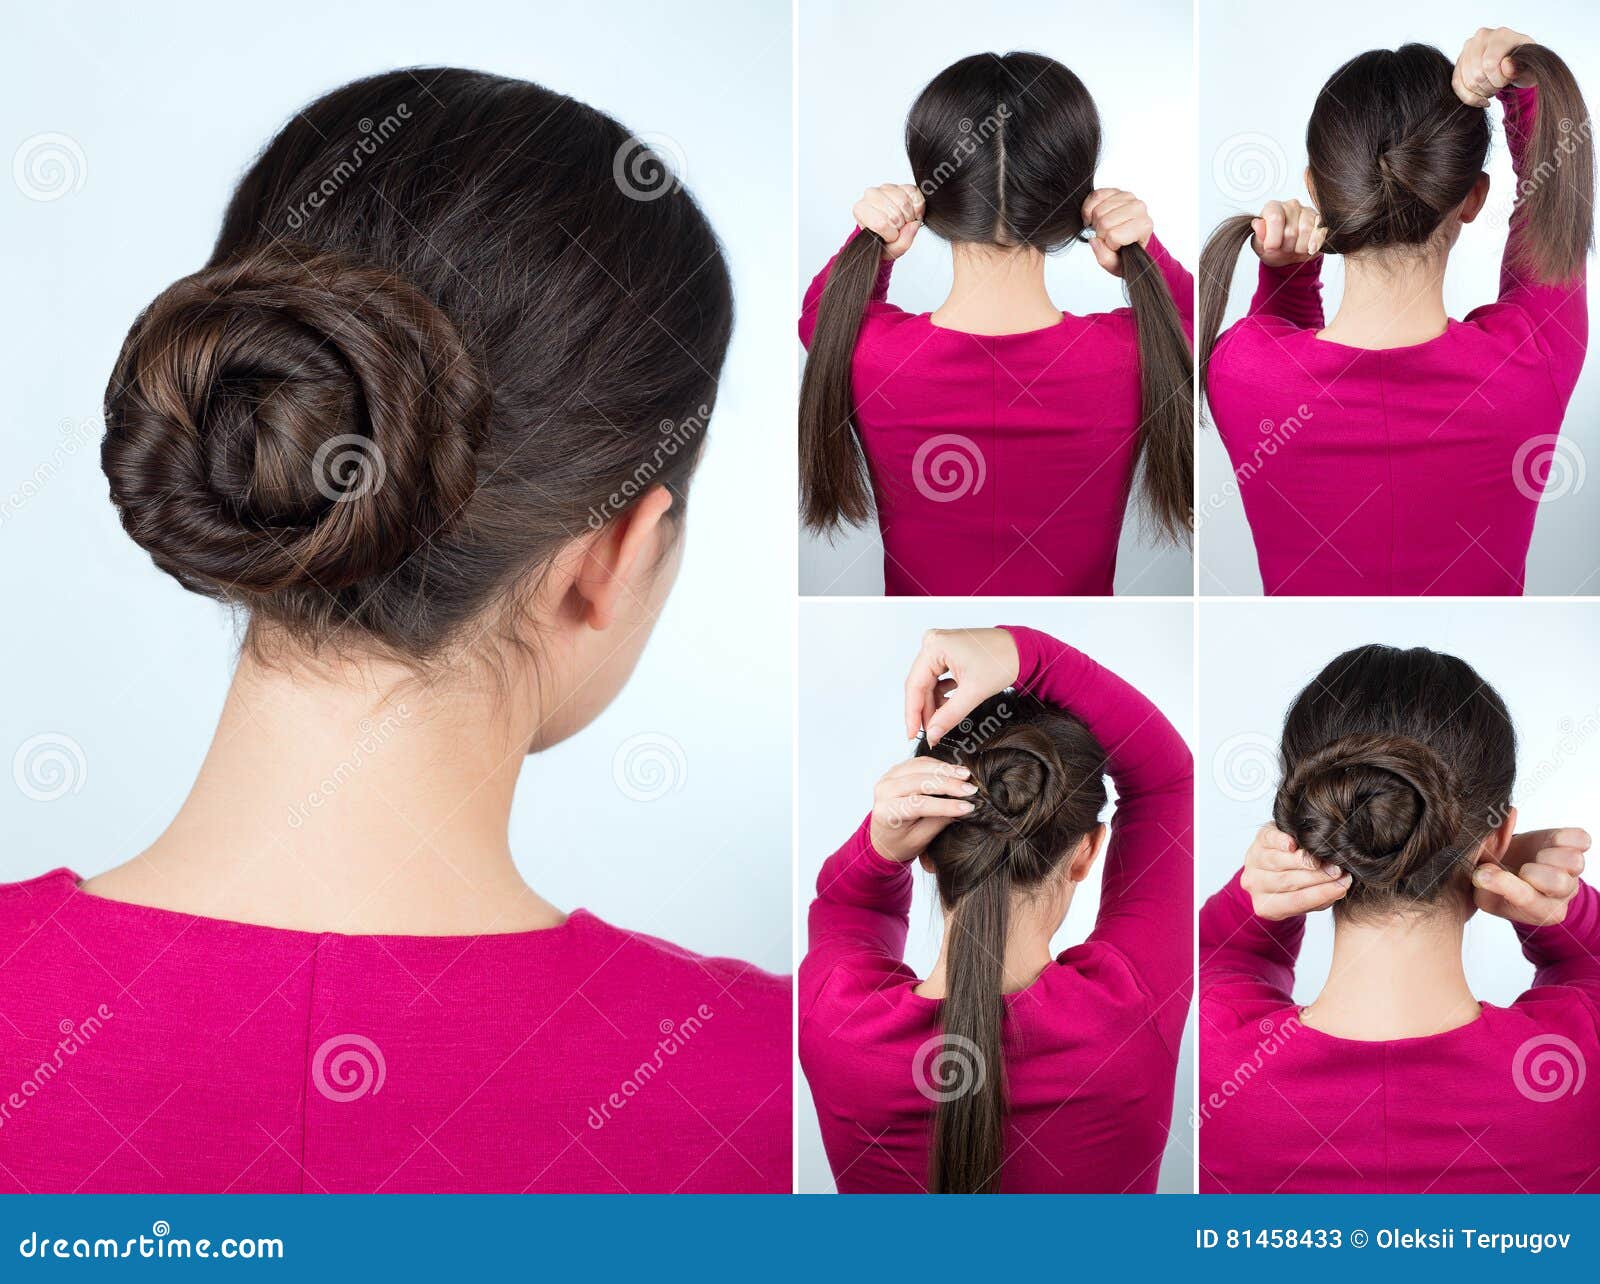 Hairstyle Twisted Bun Tutorial Stock Image Image Of Beauty